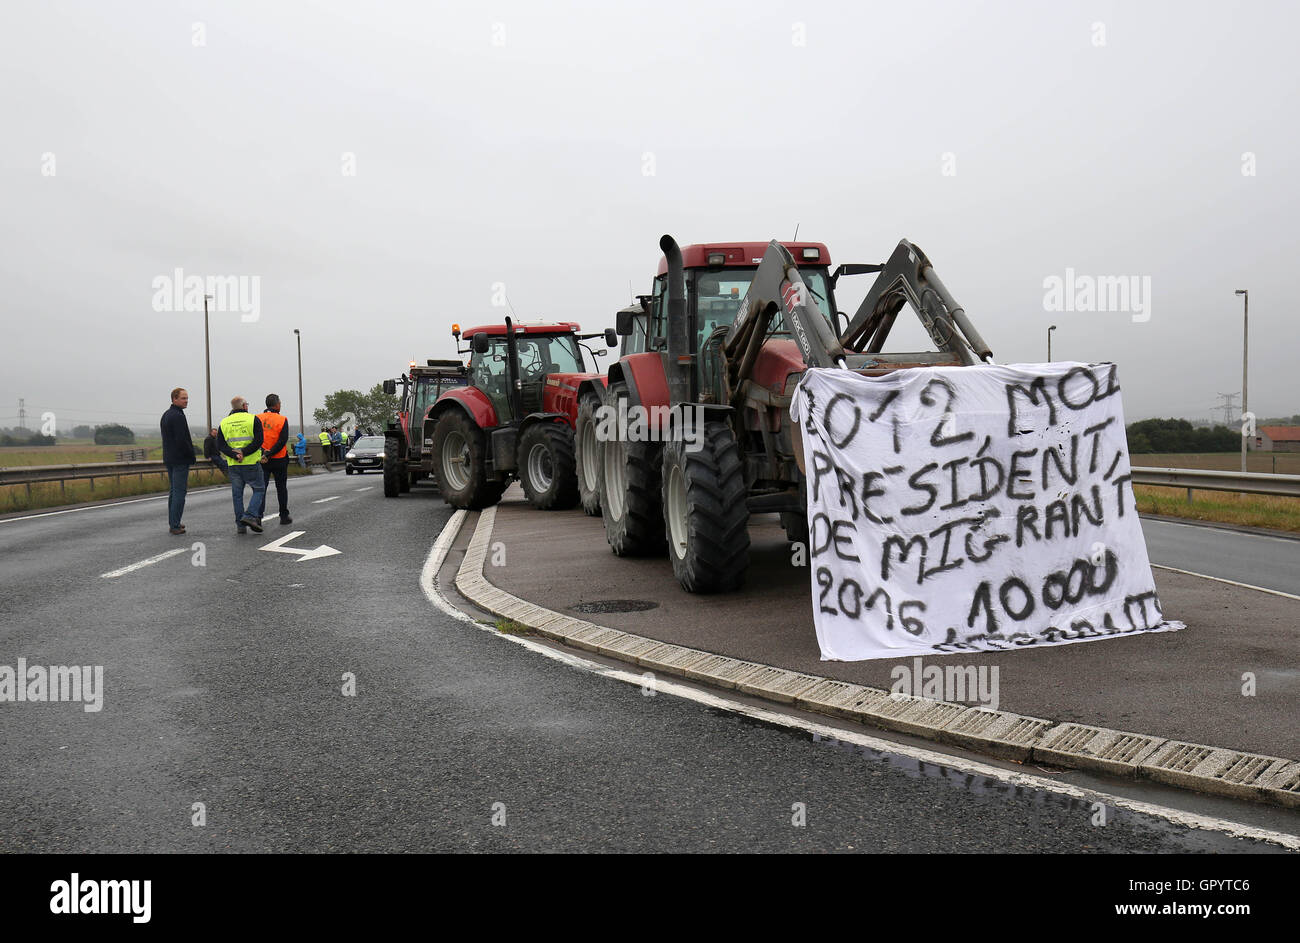 Tractors slow down traffic on a road near Calais, France, as part of a campaign for the Jungle migrant camp to be demolished. Stock Photo